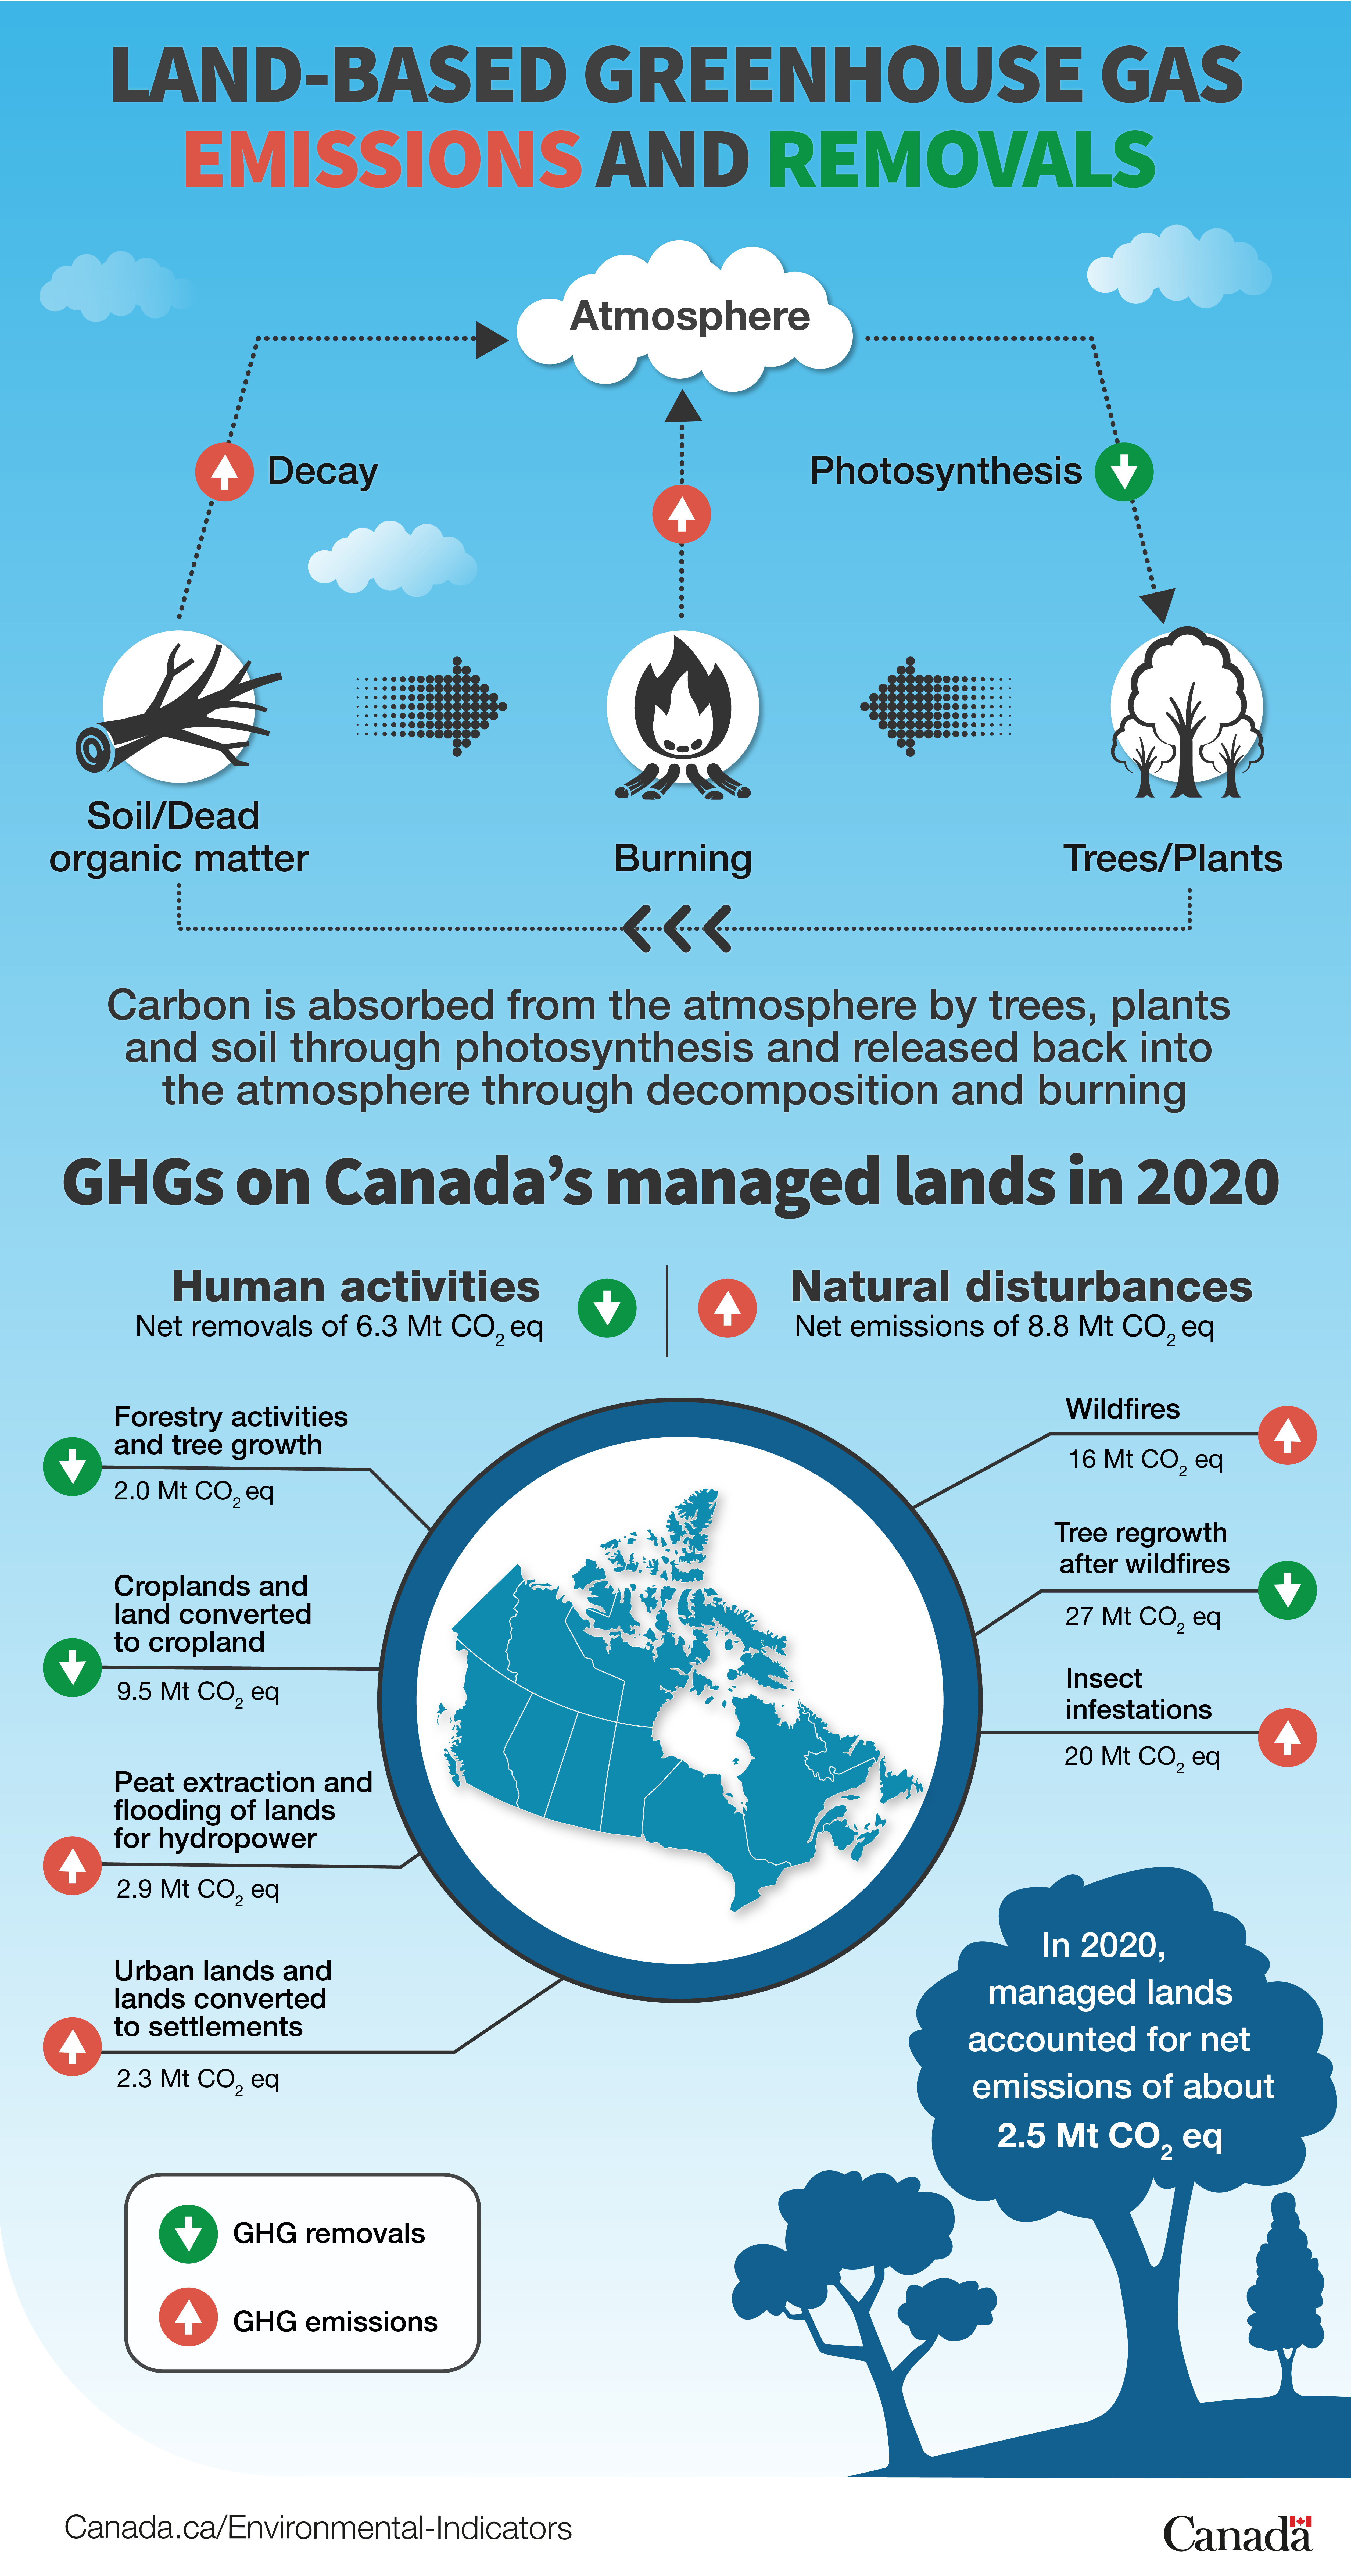 Infographic on Land-based greenhouse gas emissions and removals (see below for long description)